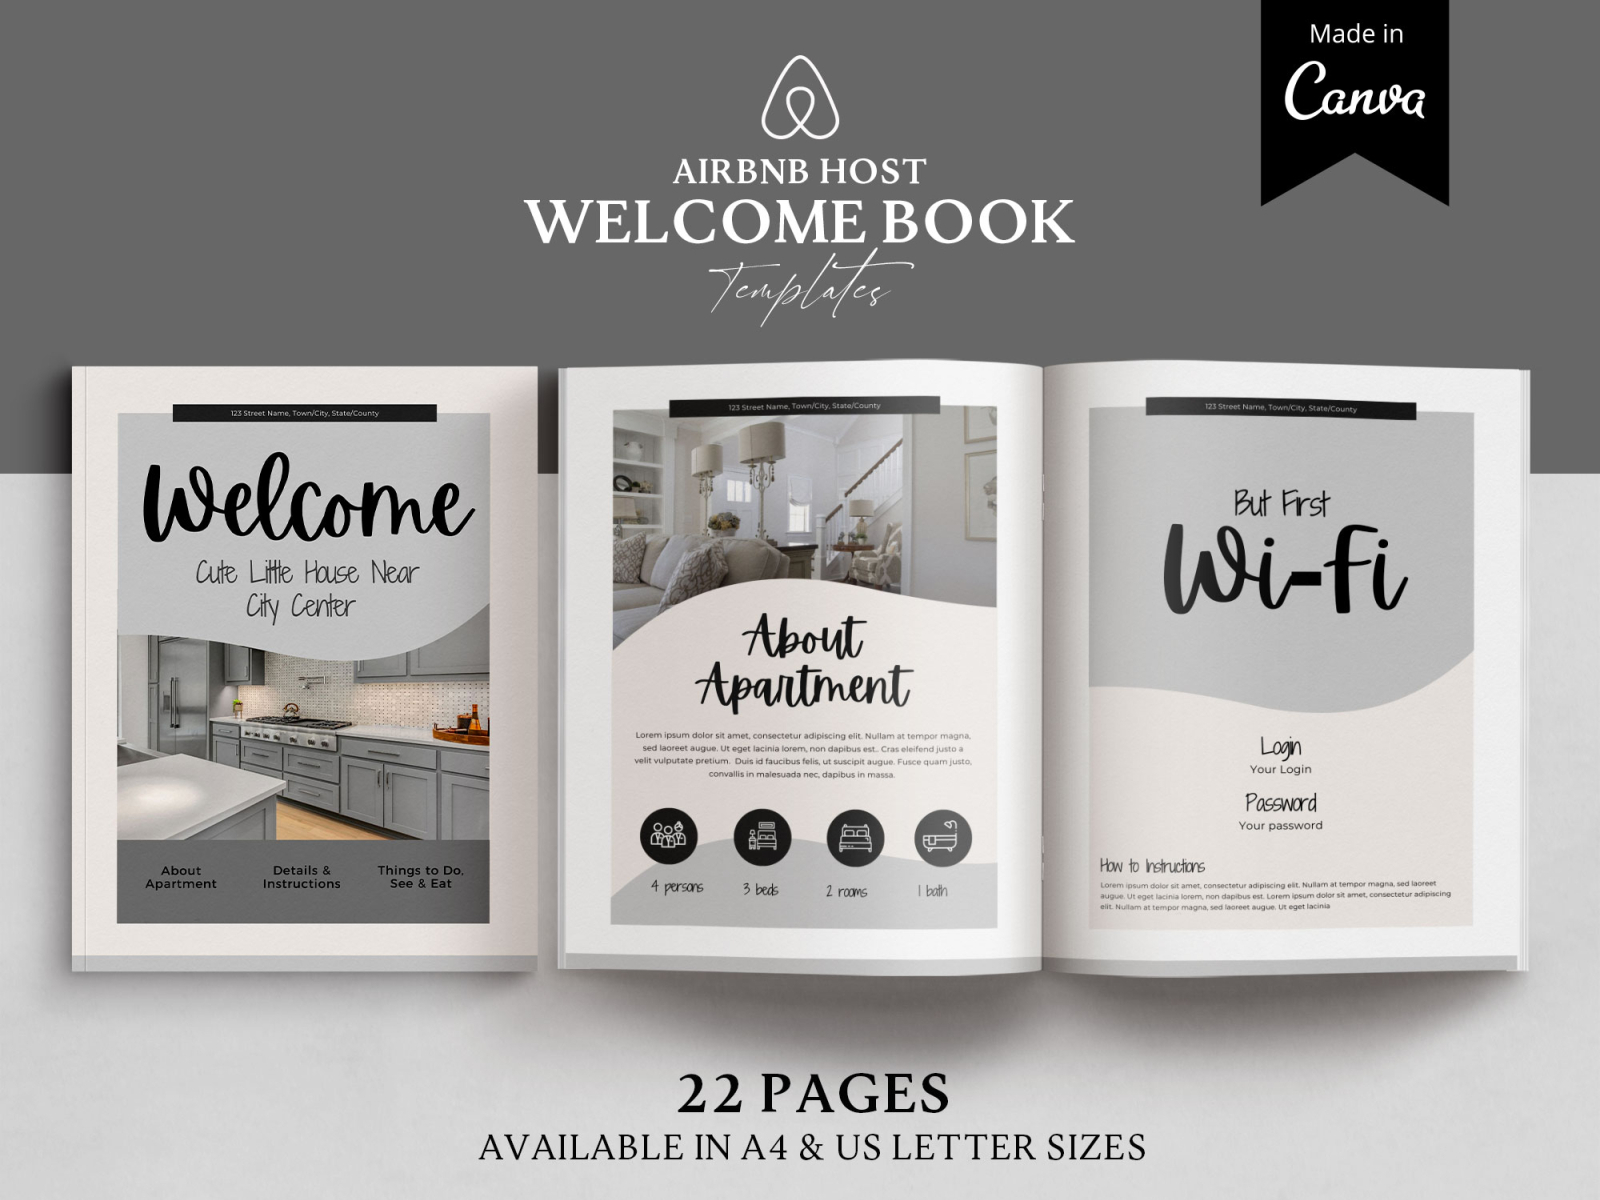 How To Make A Welcome Book For Airbnb